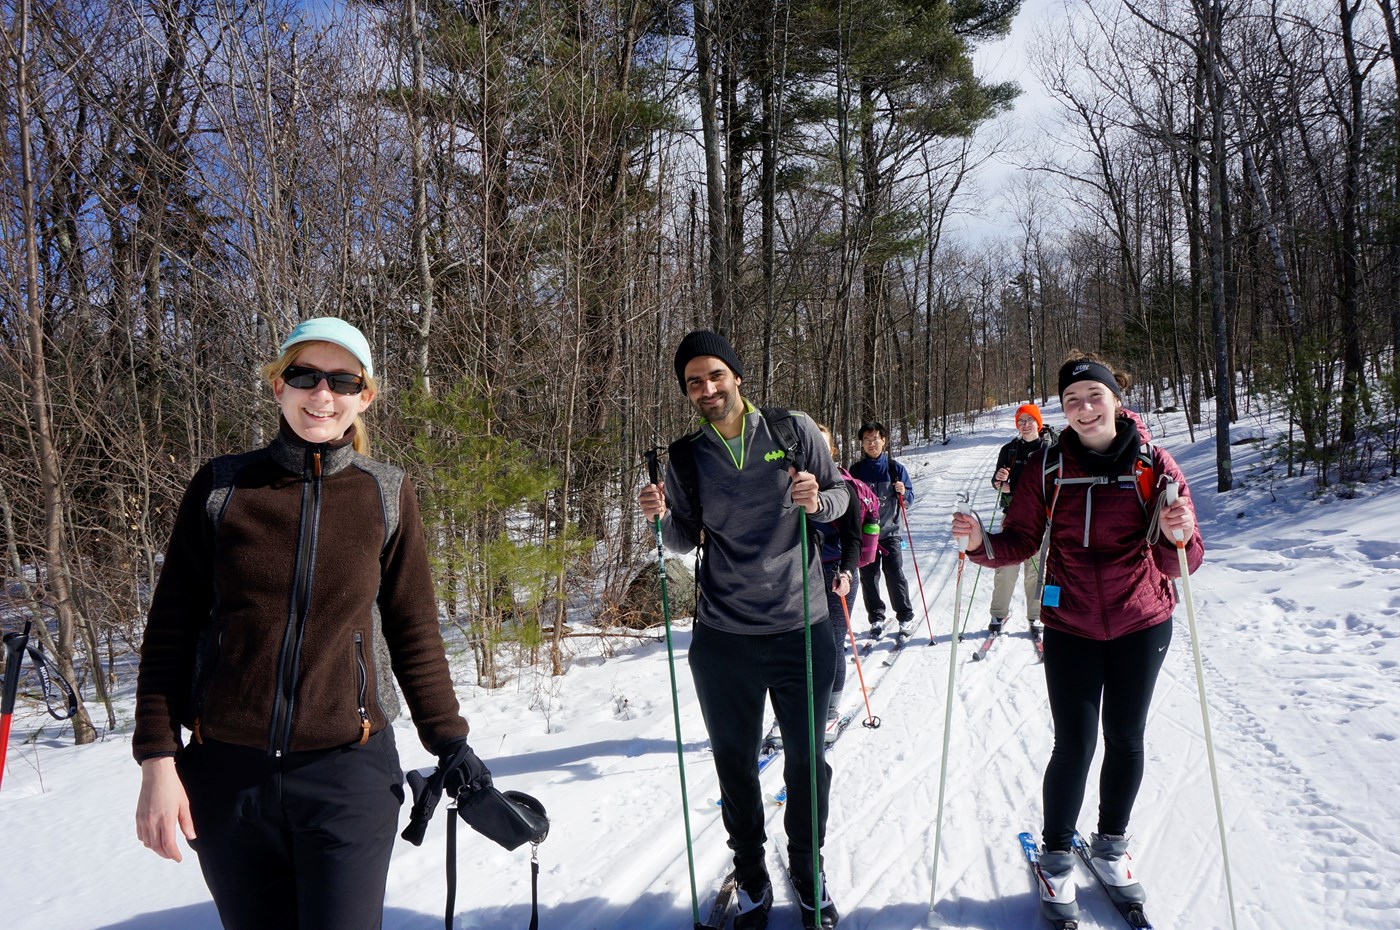 Students pose for picture smiling while cross country skiing.